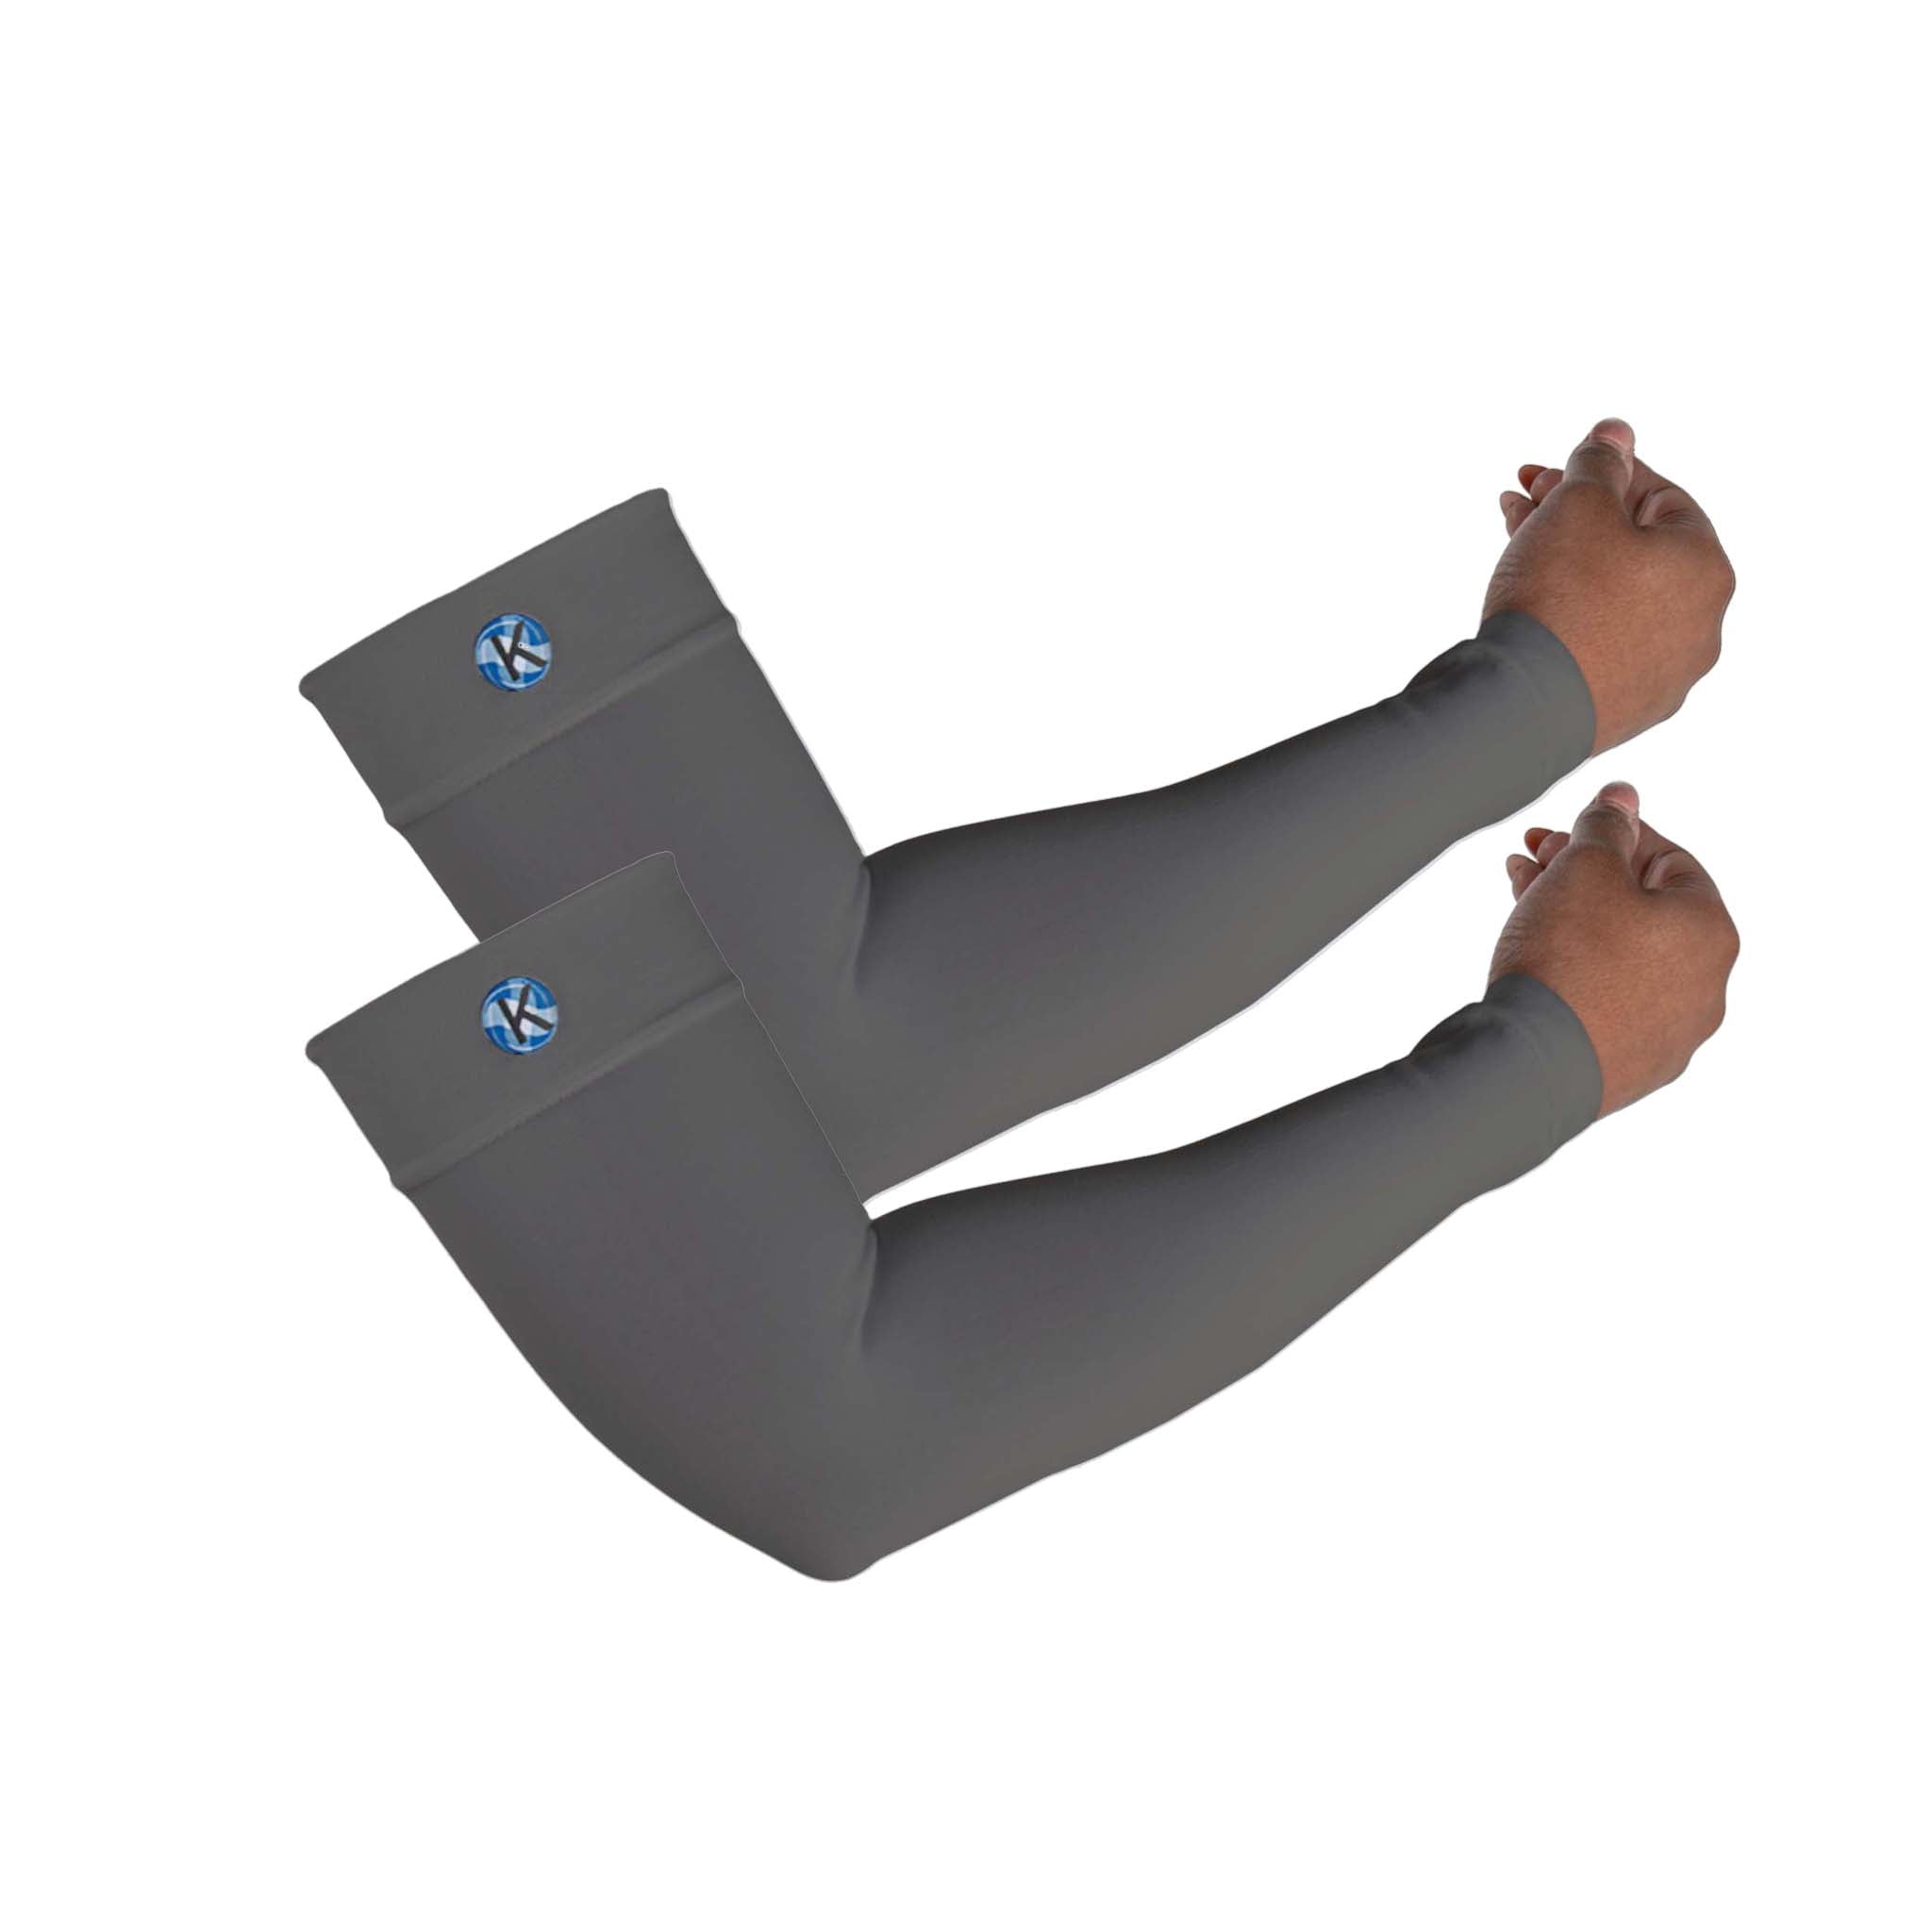 Compression Arm Sleeve: Recovery Flex Arm Sleeves